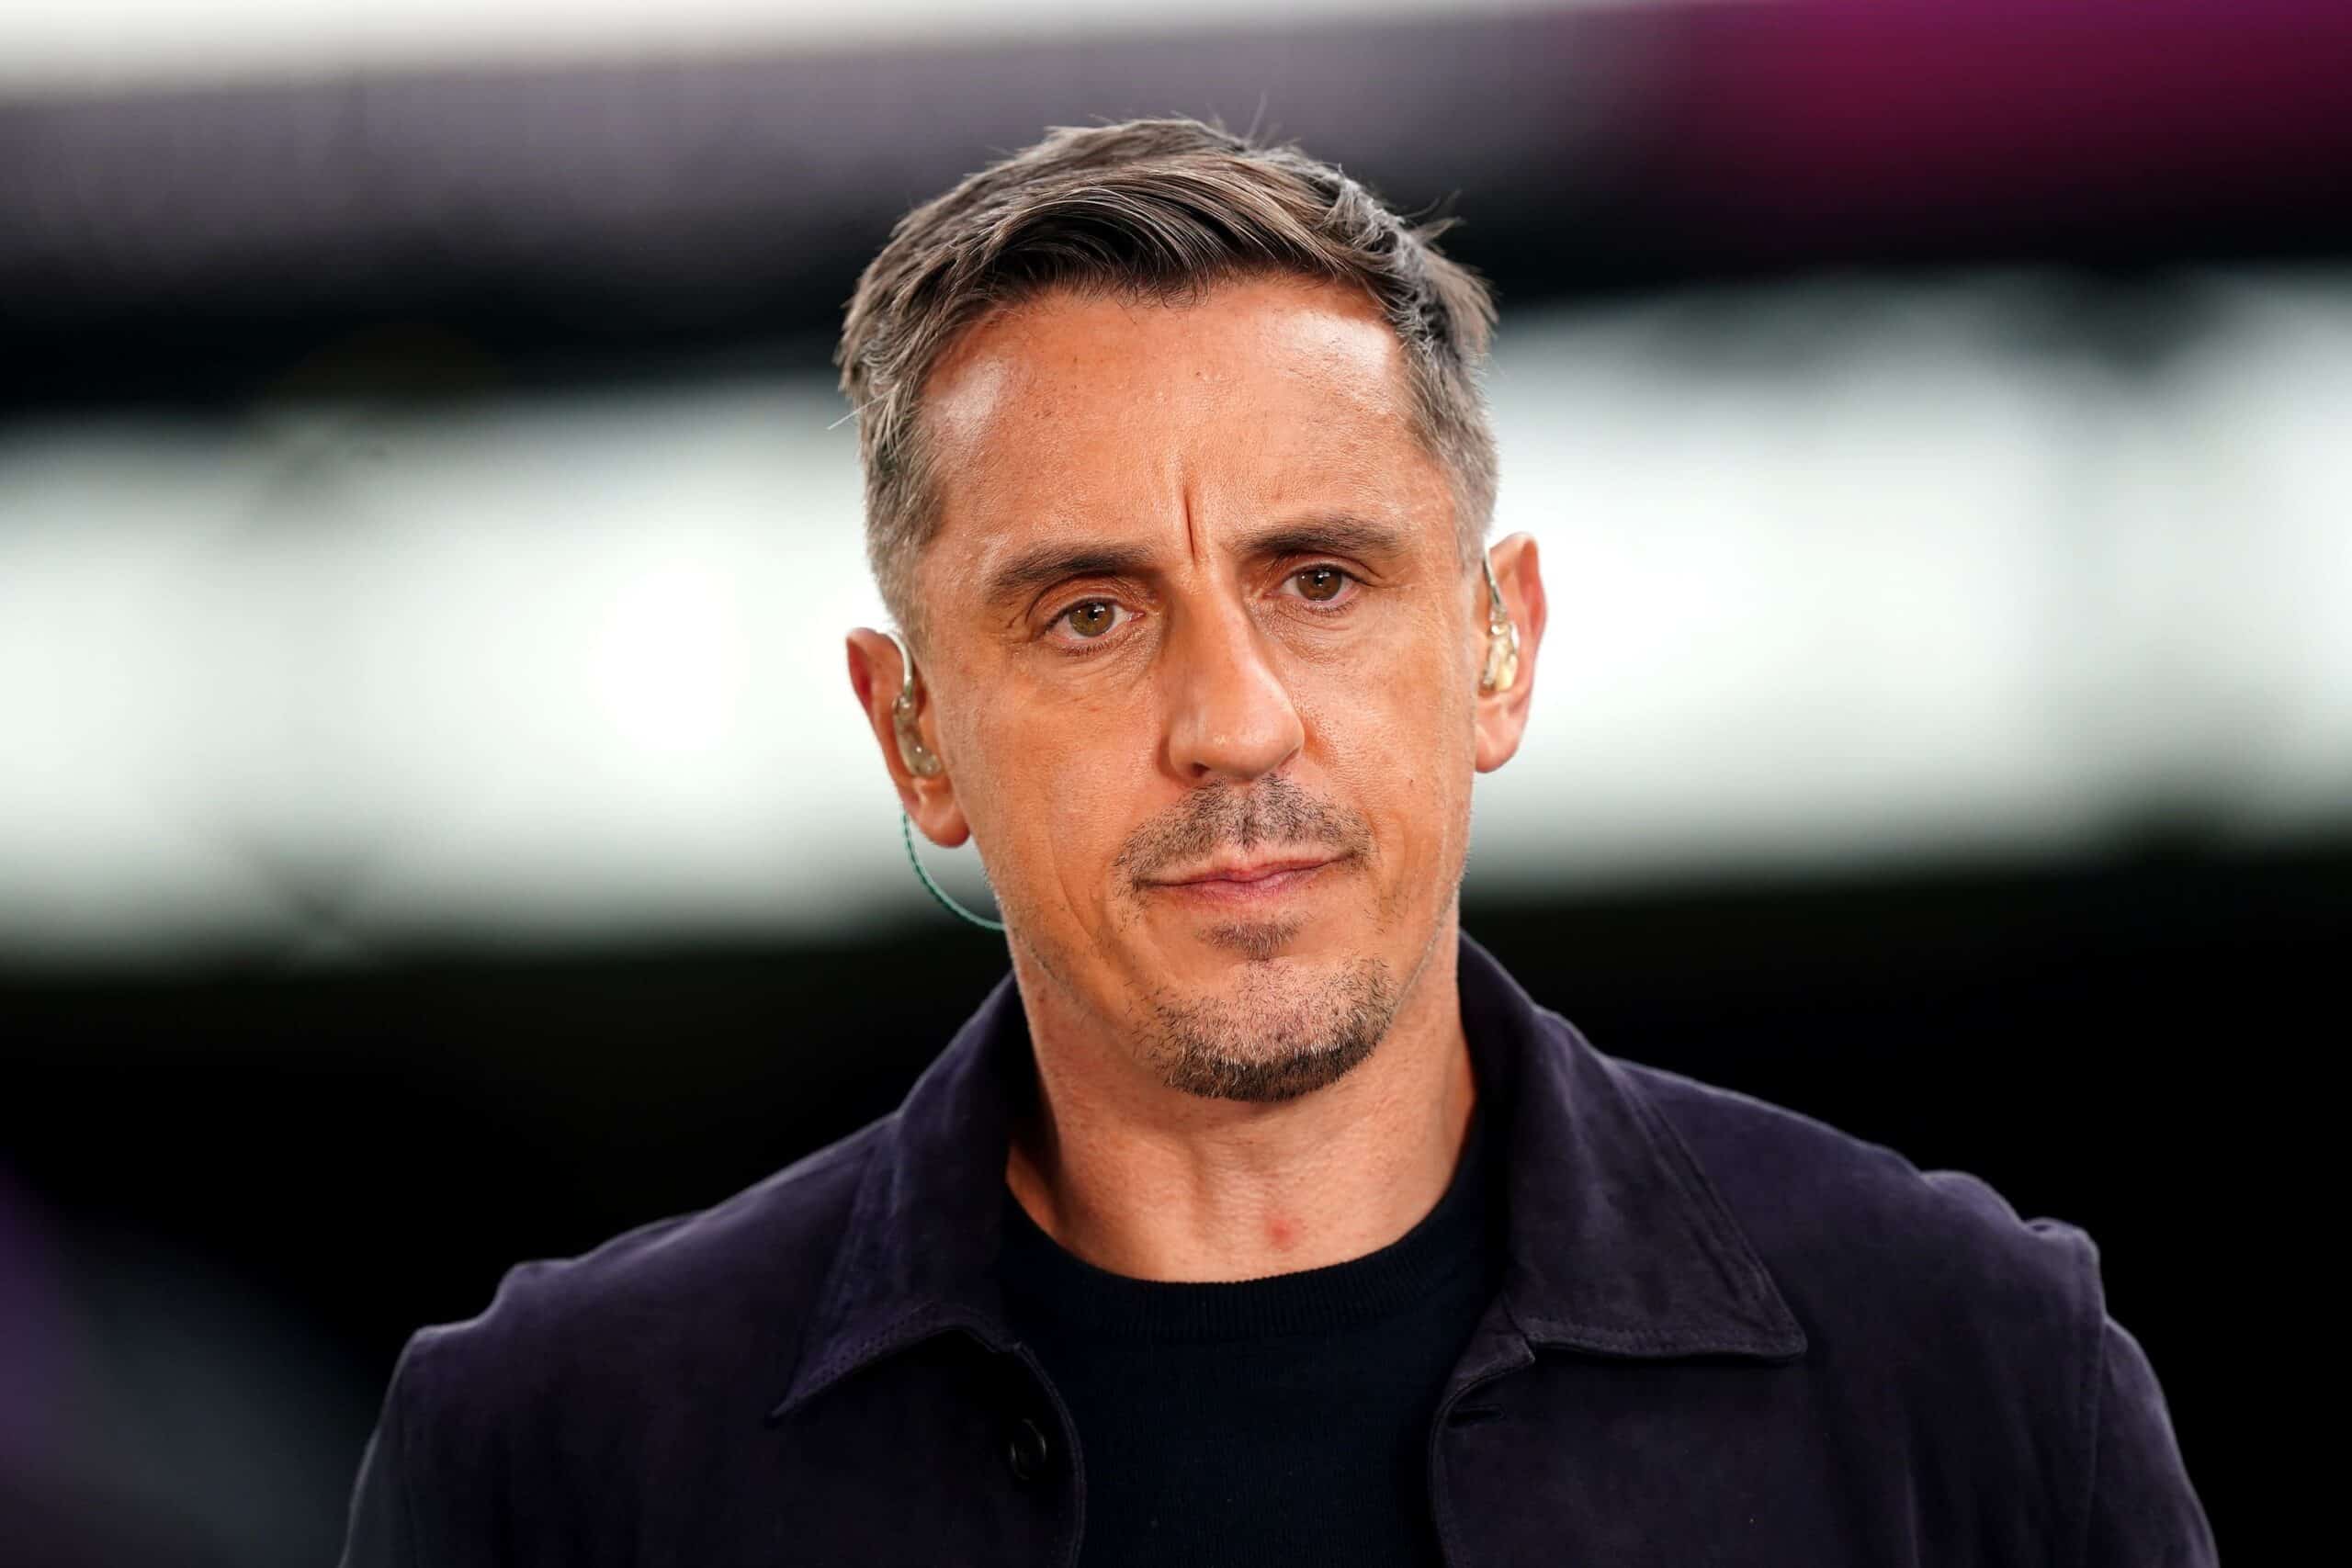 Gary Neville issues last ditch plea to voters